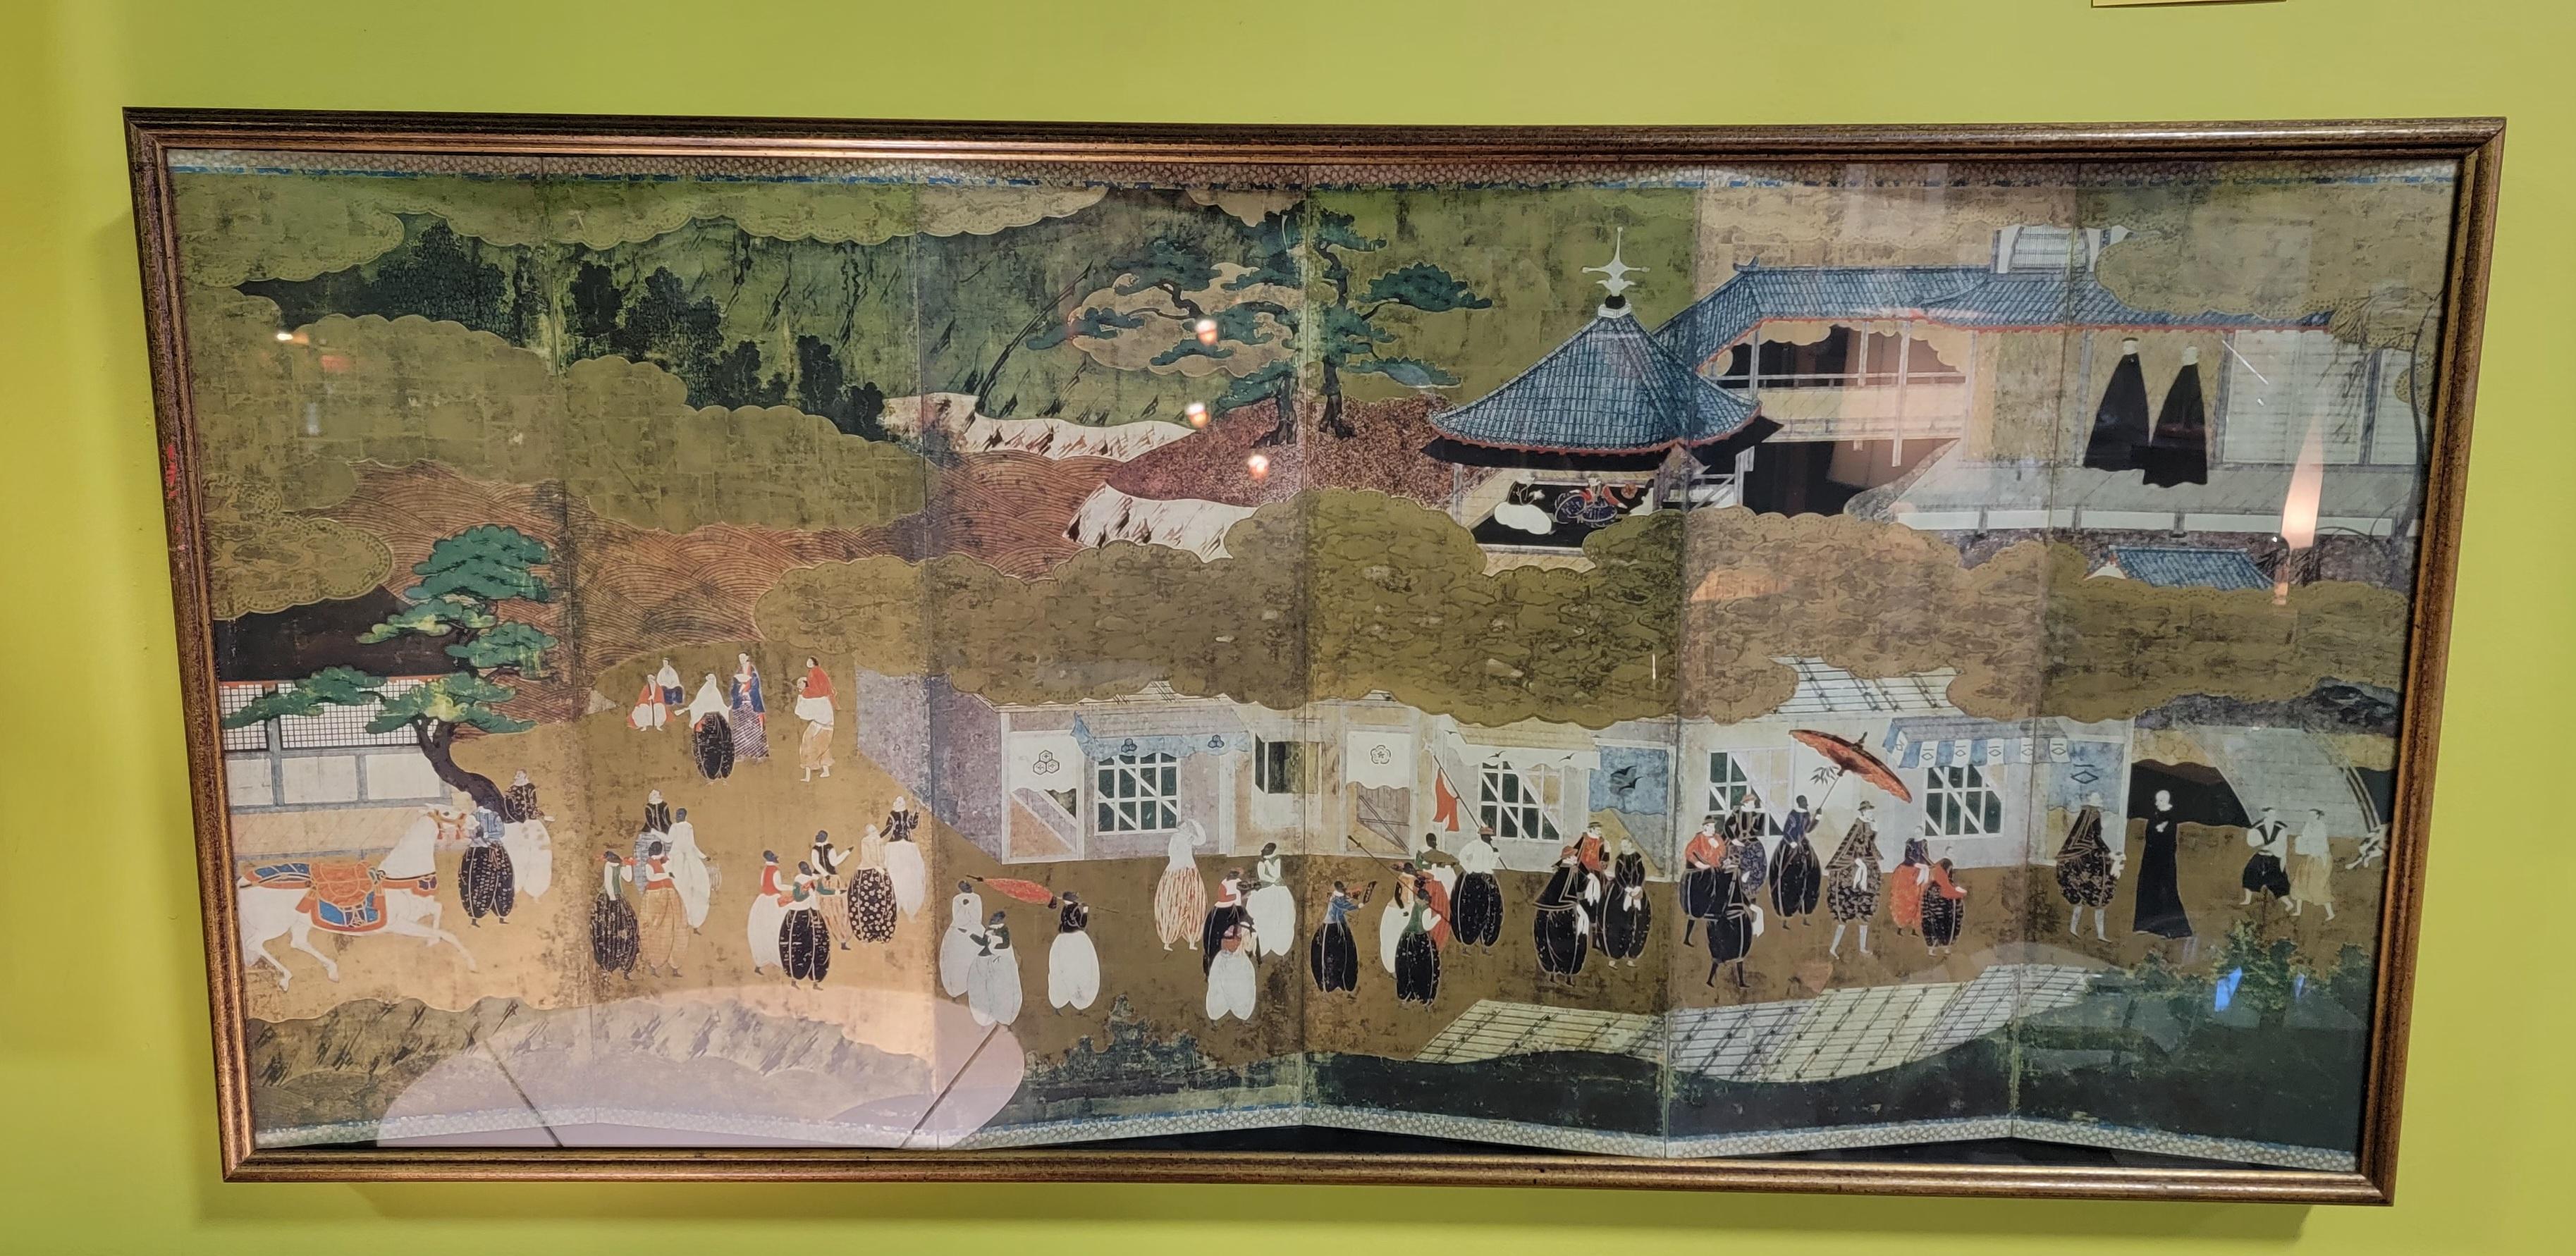 Asian folding panel or screen in shadow box frame. Appears to be Korean and hand painted. Depicting a village scene. Excellent original vintage condition. 